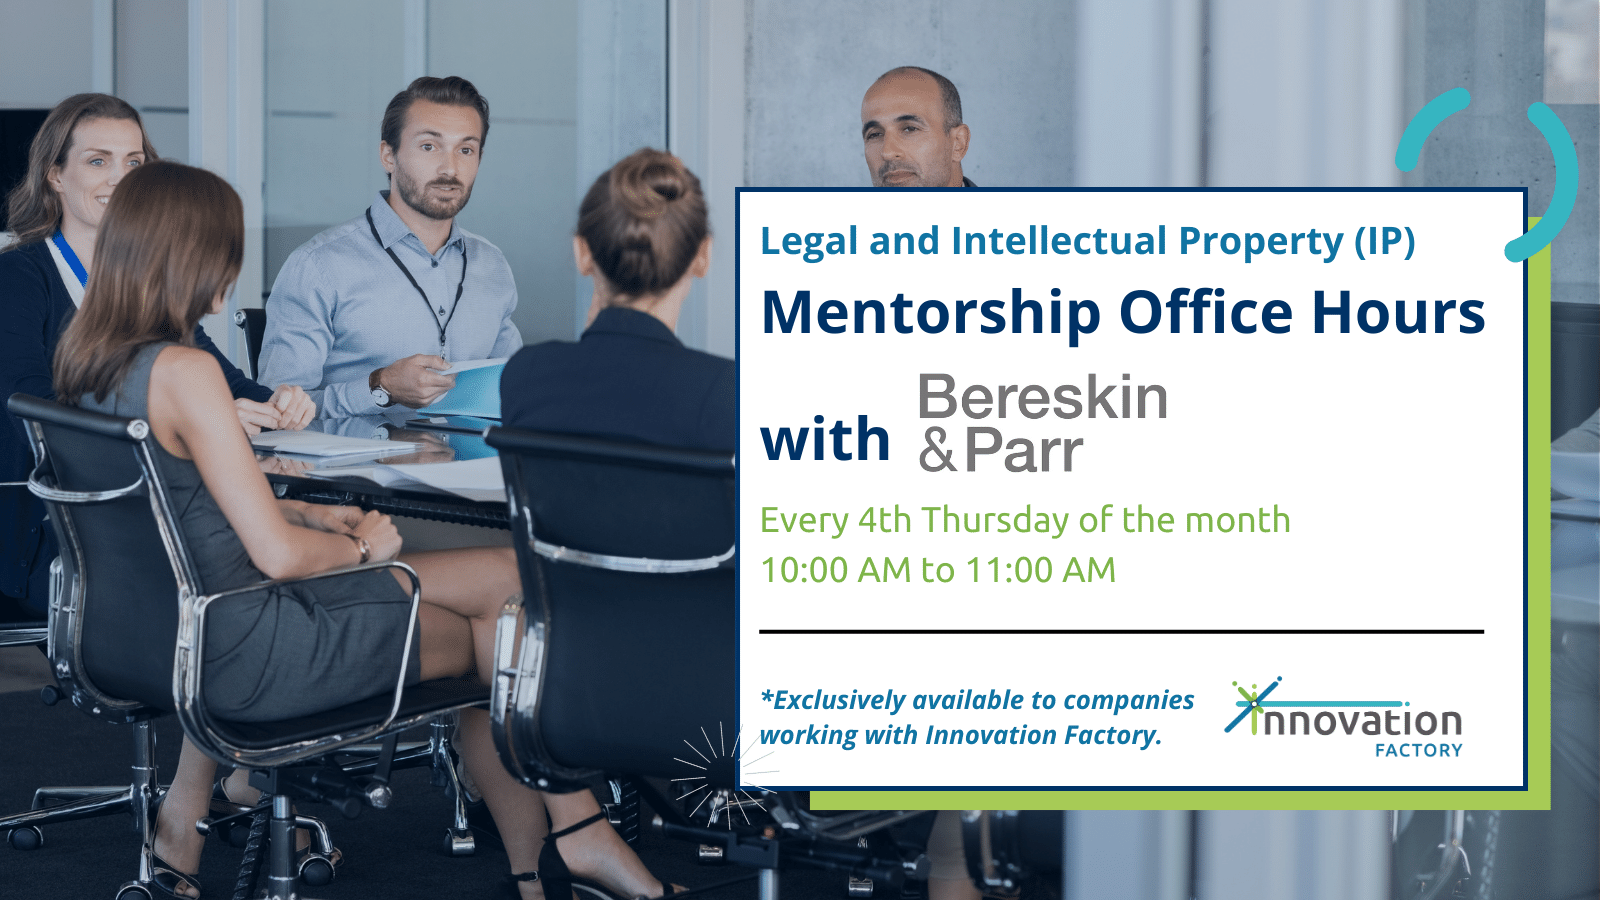 Receive legal and IP mentorship from Bereskin & Parr to position your startup for long-term success while avoiding costly legal pitfalls.